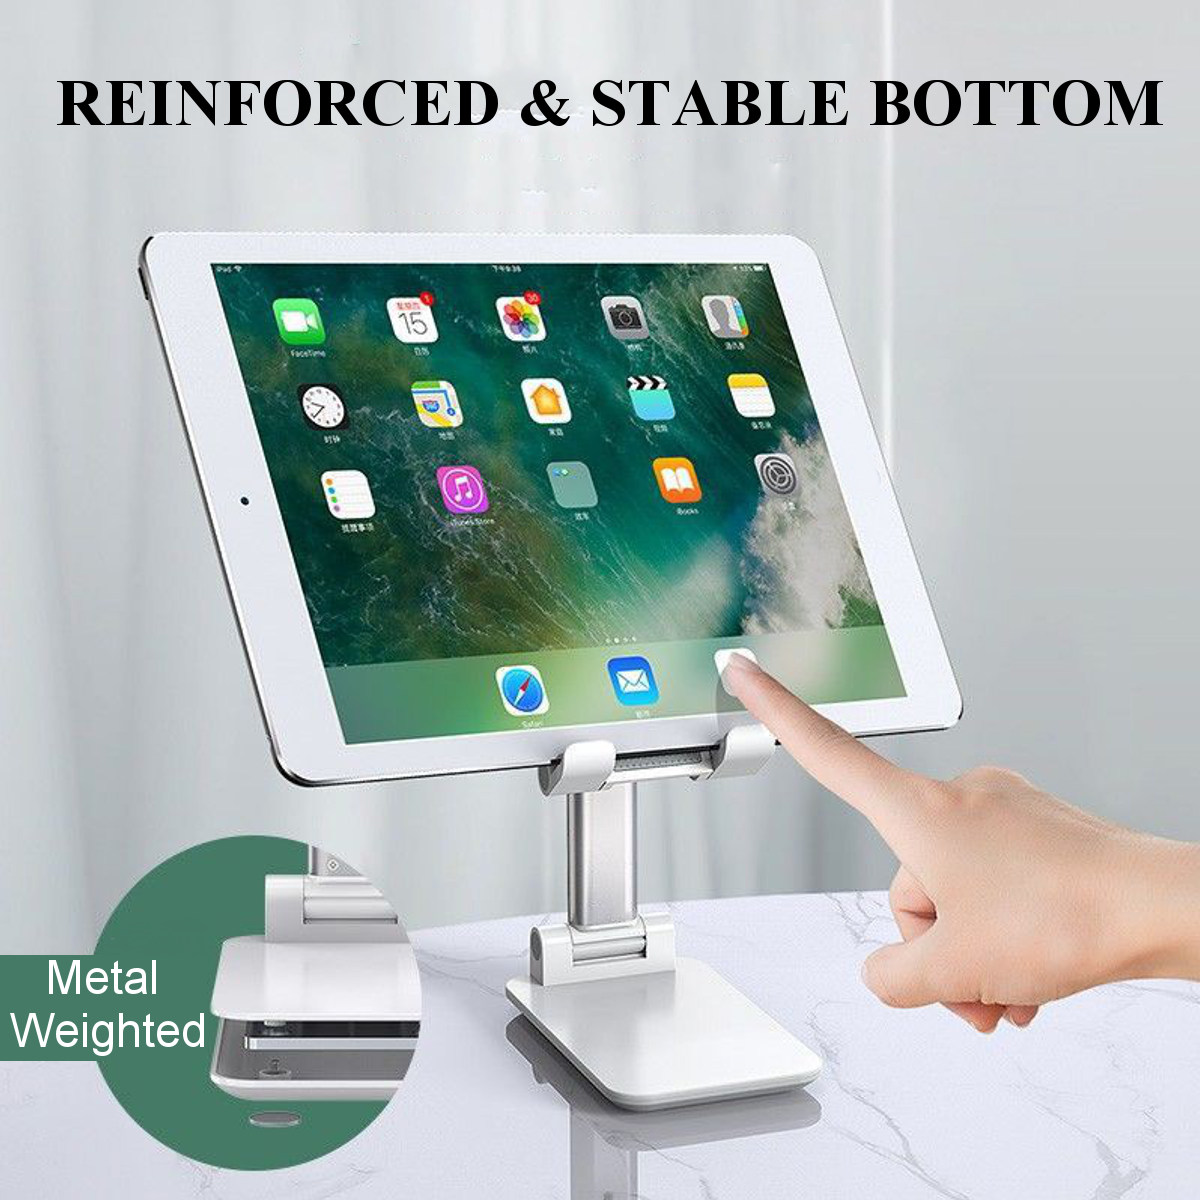 CCT9-Universal-Folding-Telescopic-Desktop-Mobile-Phone-Tablet-Holder-Stand-for-iPad-Air-for-iPhone-1-1820698-4